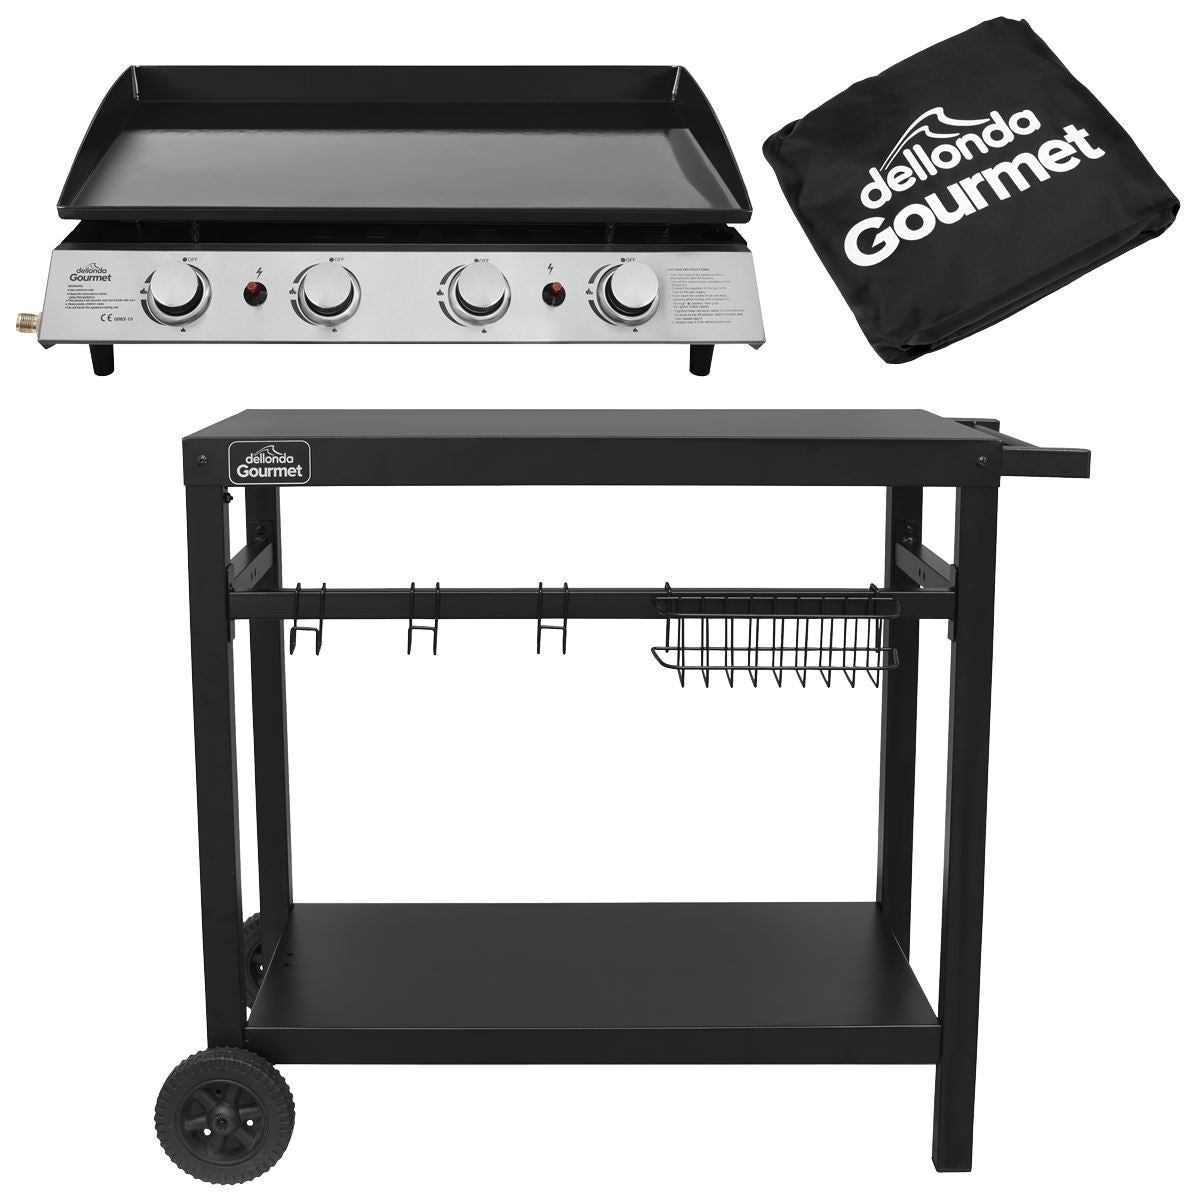 Dellonda 4 Burner Portable Gas Plancha 10kW BBQ Griddle, Stainless Steel, Supplied with Water Resistant Cover & Trolley